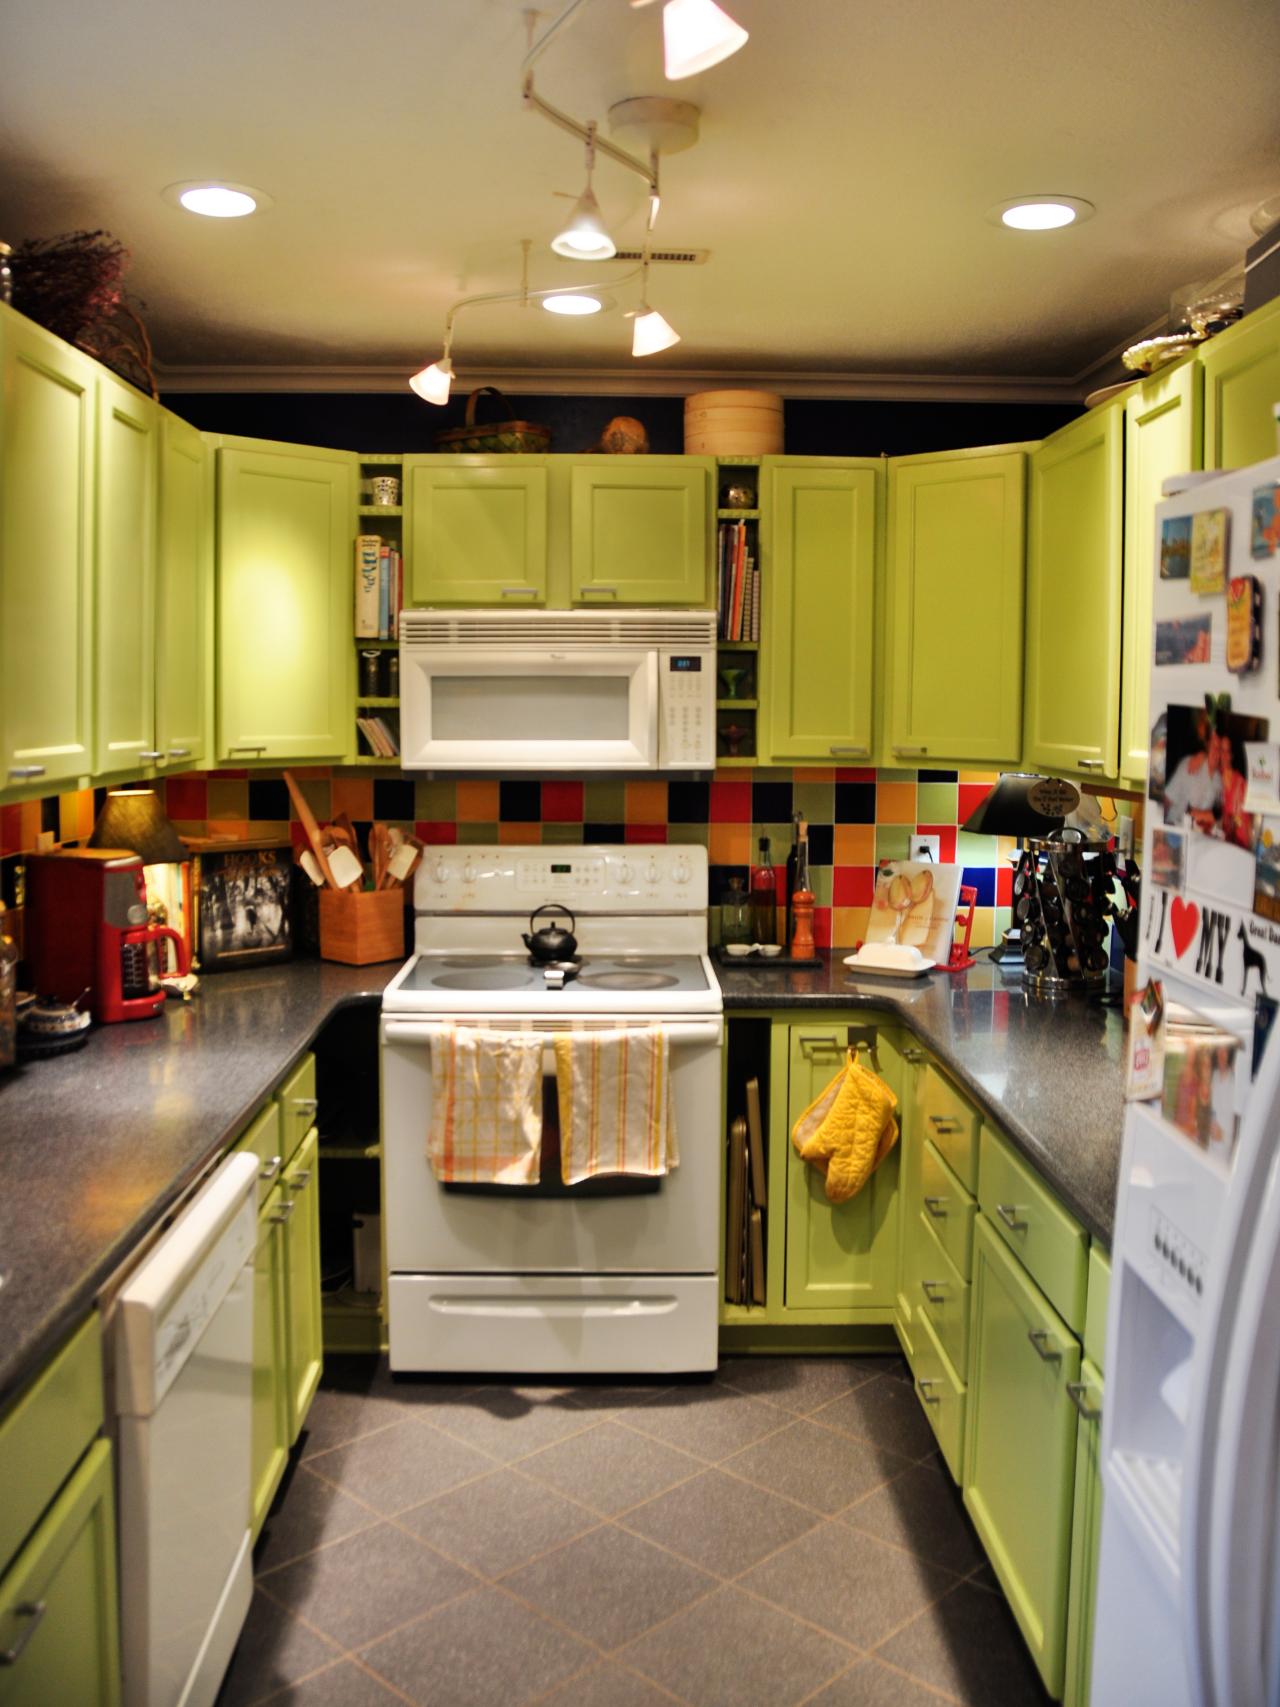 Compact Appliances for Tiny Kitchens | HGTV's Decorating & Design Blog